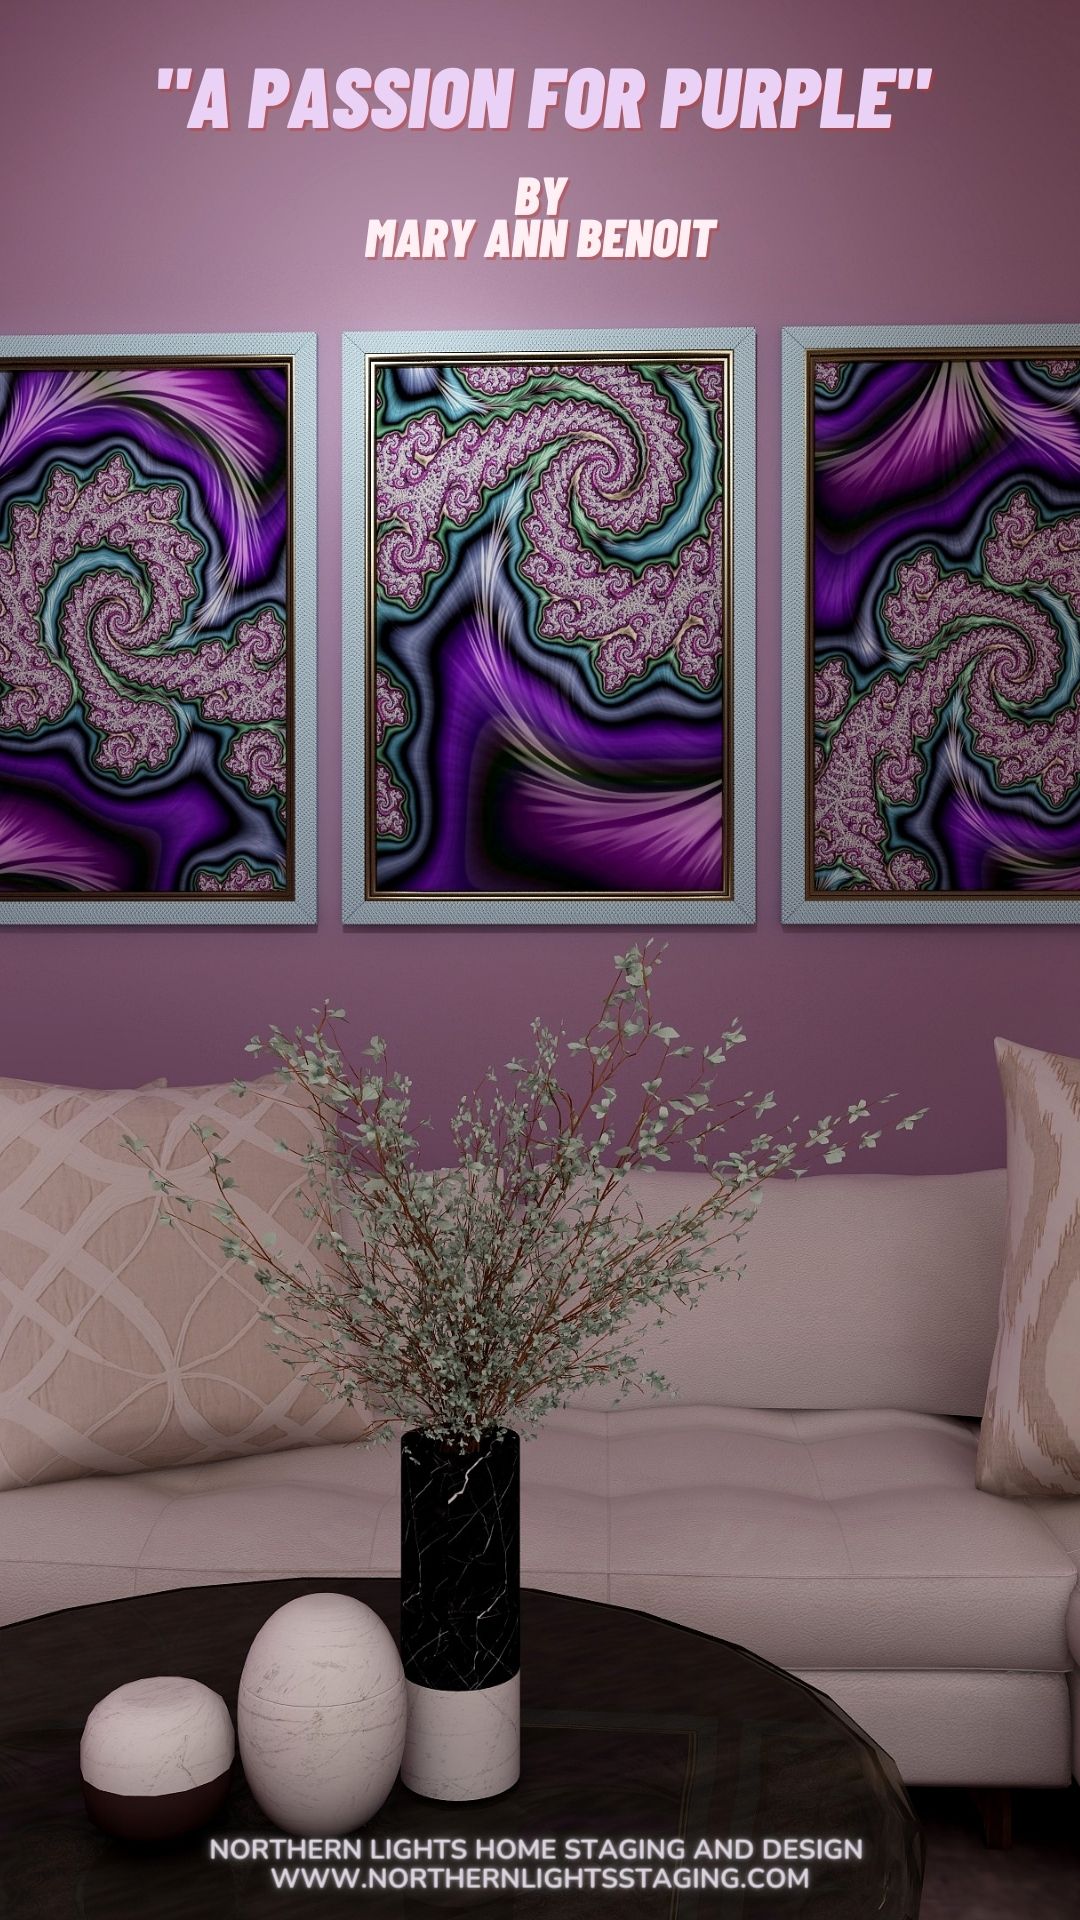 Let the Art be the Heart of Your Home. "A Passion for Purple" fractal art by Mary Ann Benoit in an Edesign by Northern Lights Home Staging and Design